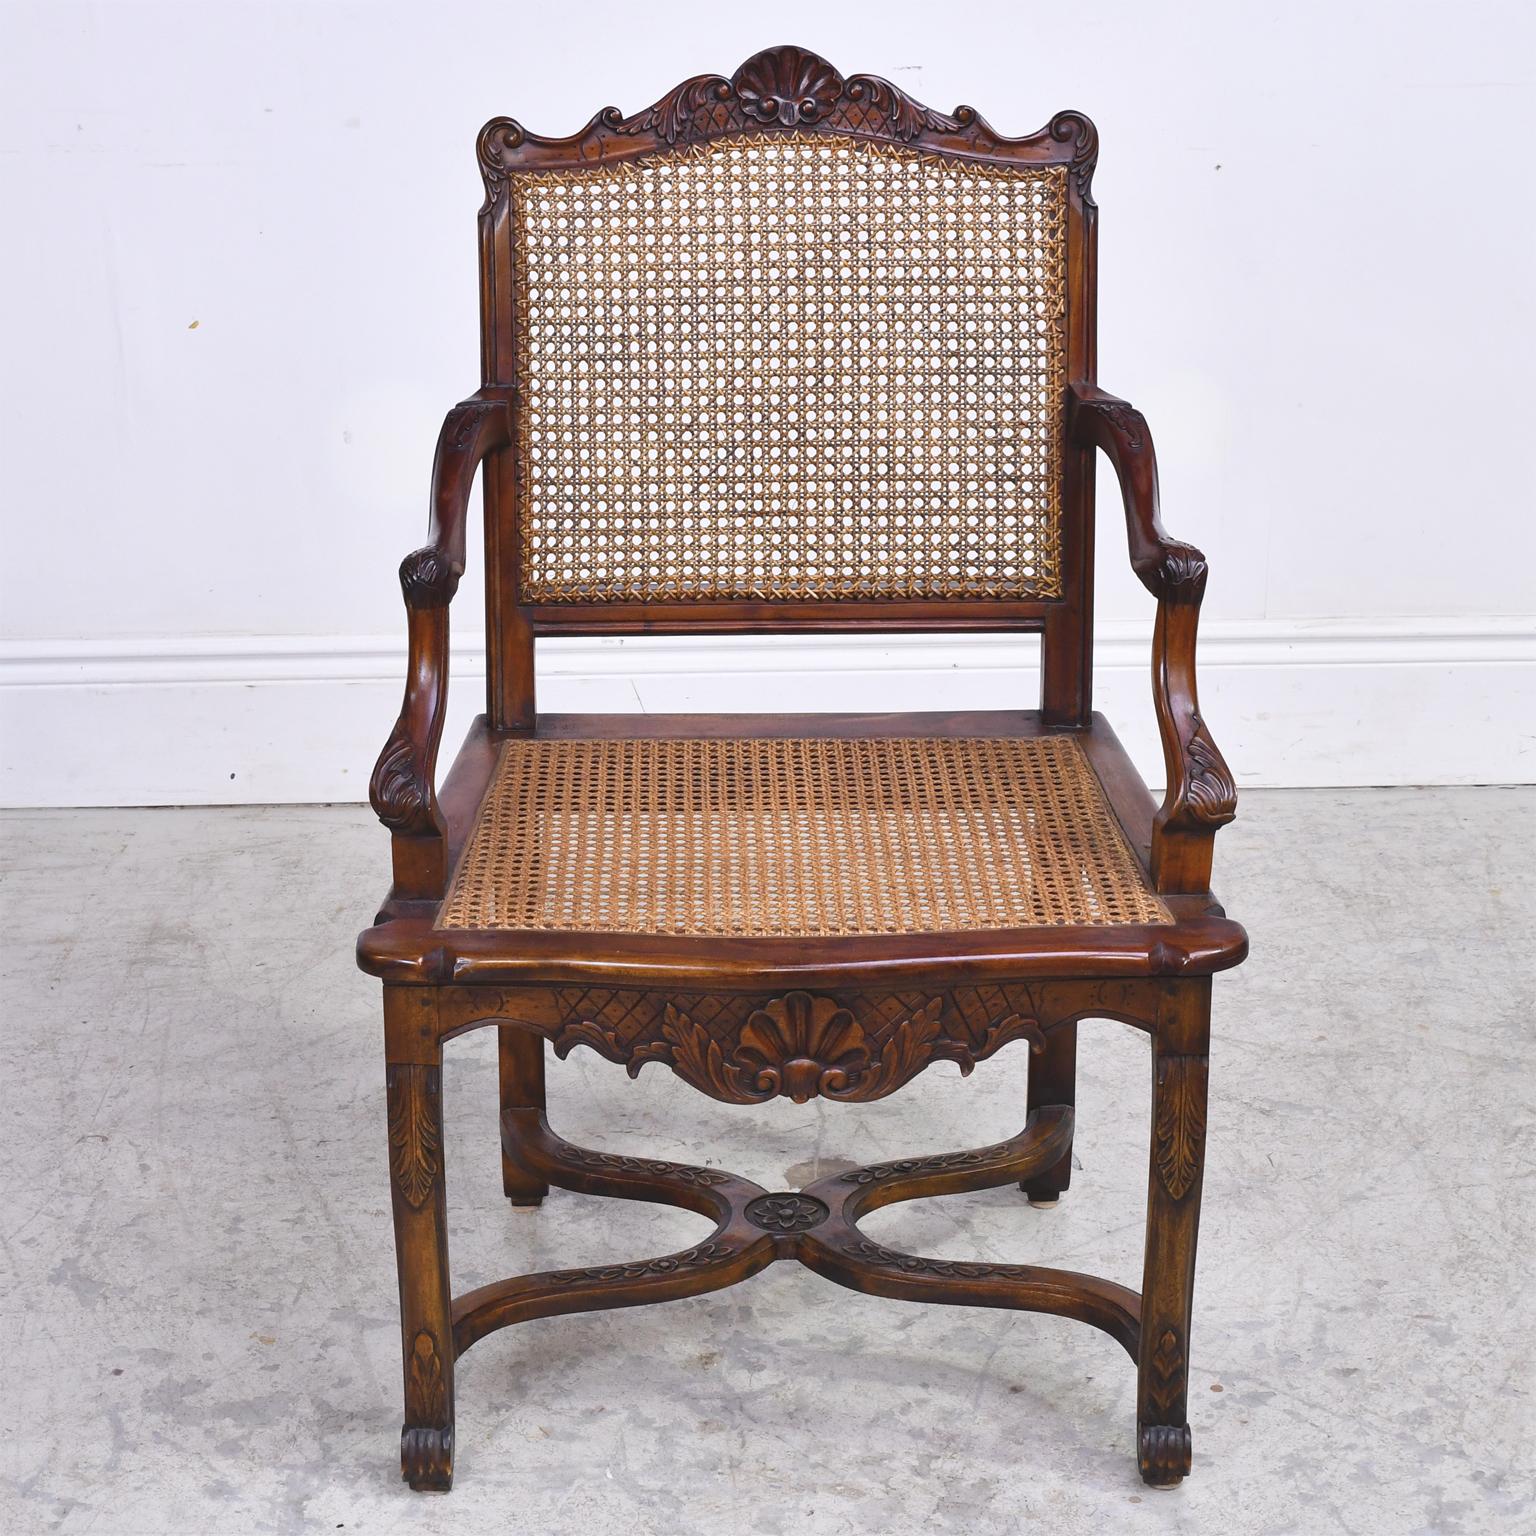 Louis XVI Set of 10 LXVI Chairs with Pair of Arms and 8 Side Chairs, Caned Seat and Back